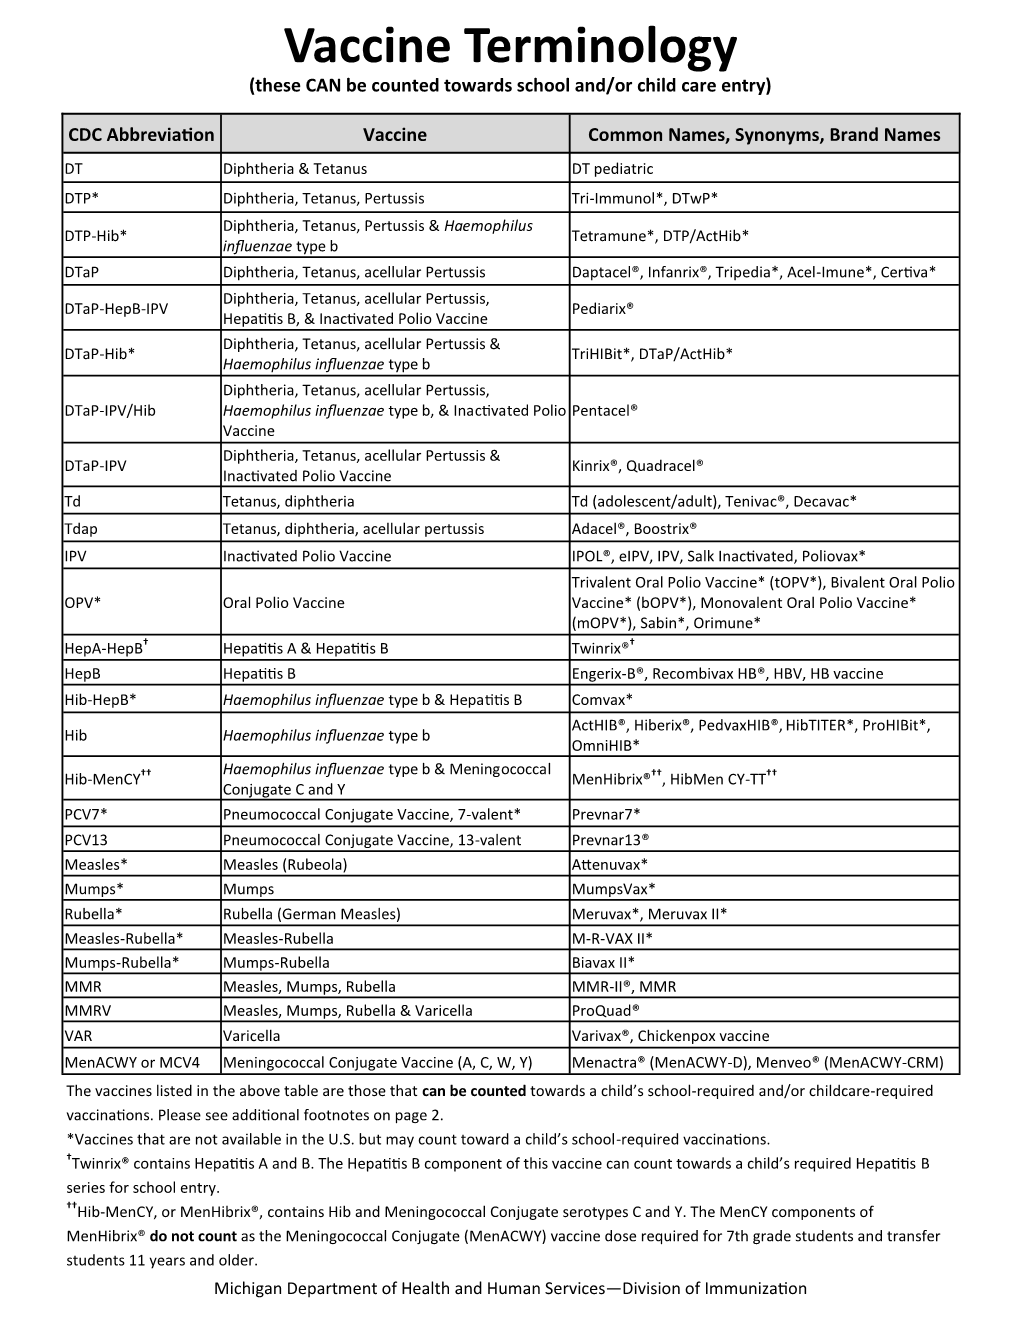 Vaccine Terminology (These CAN Be Counted Towards School And/Or Child Care Entry)